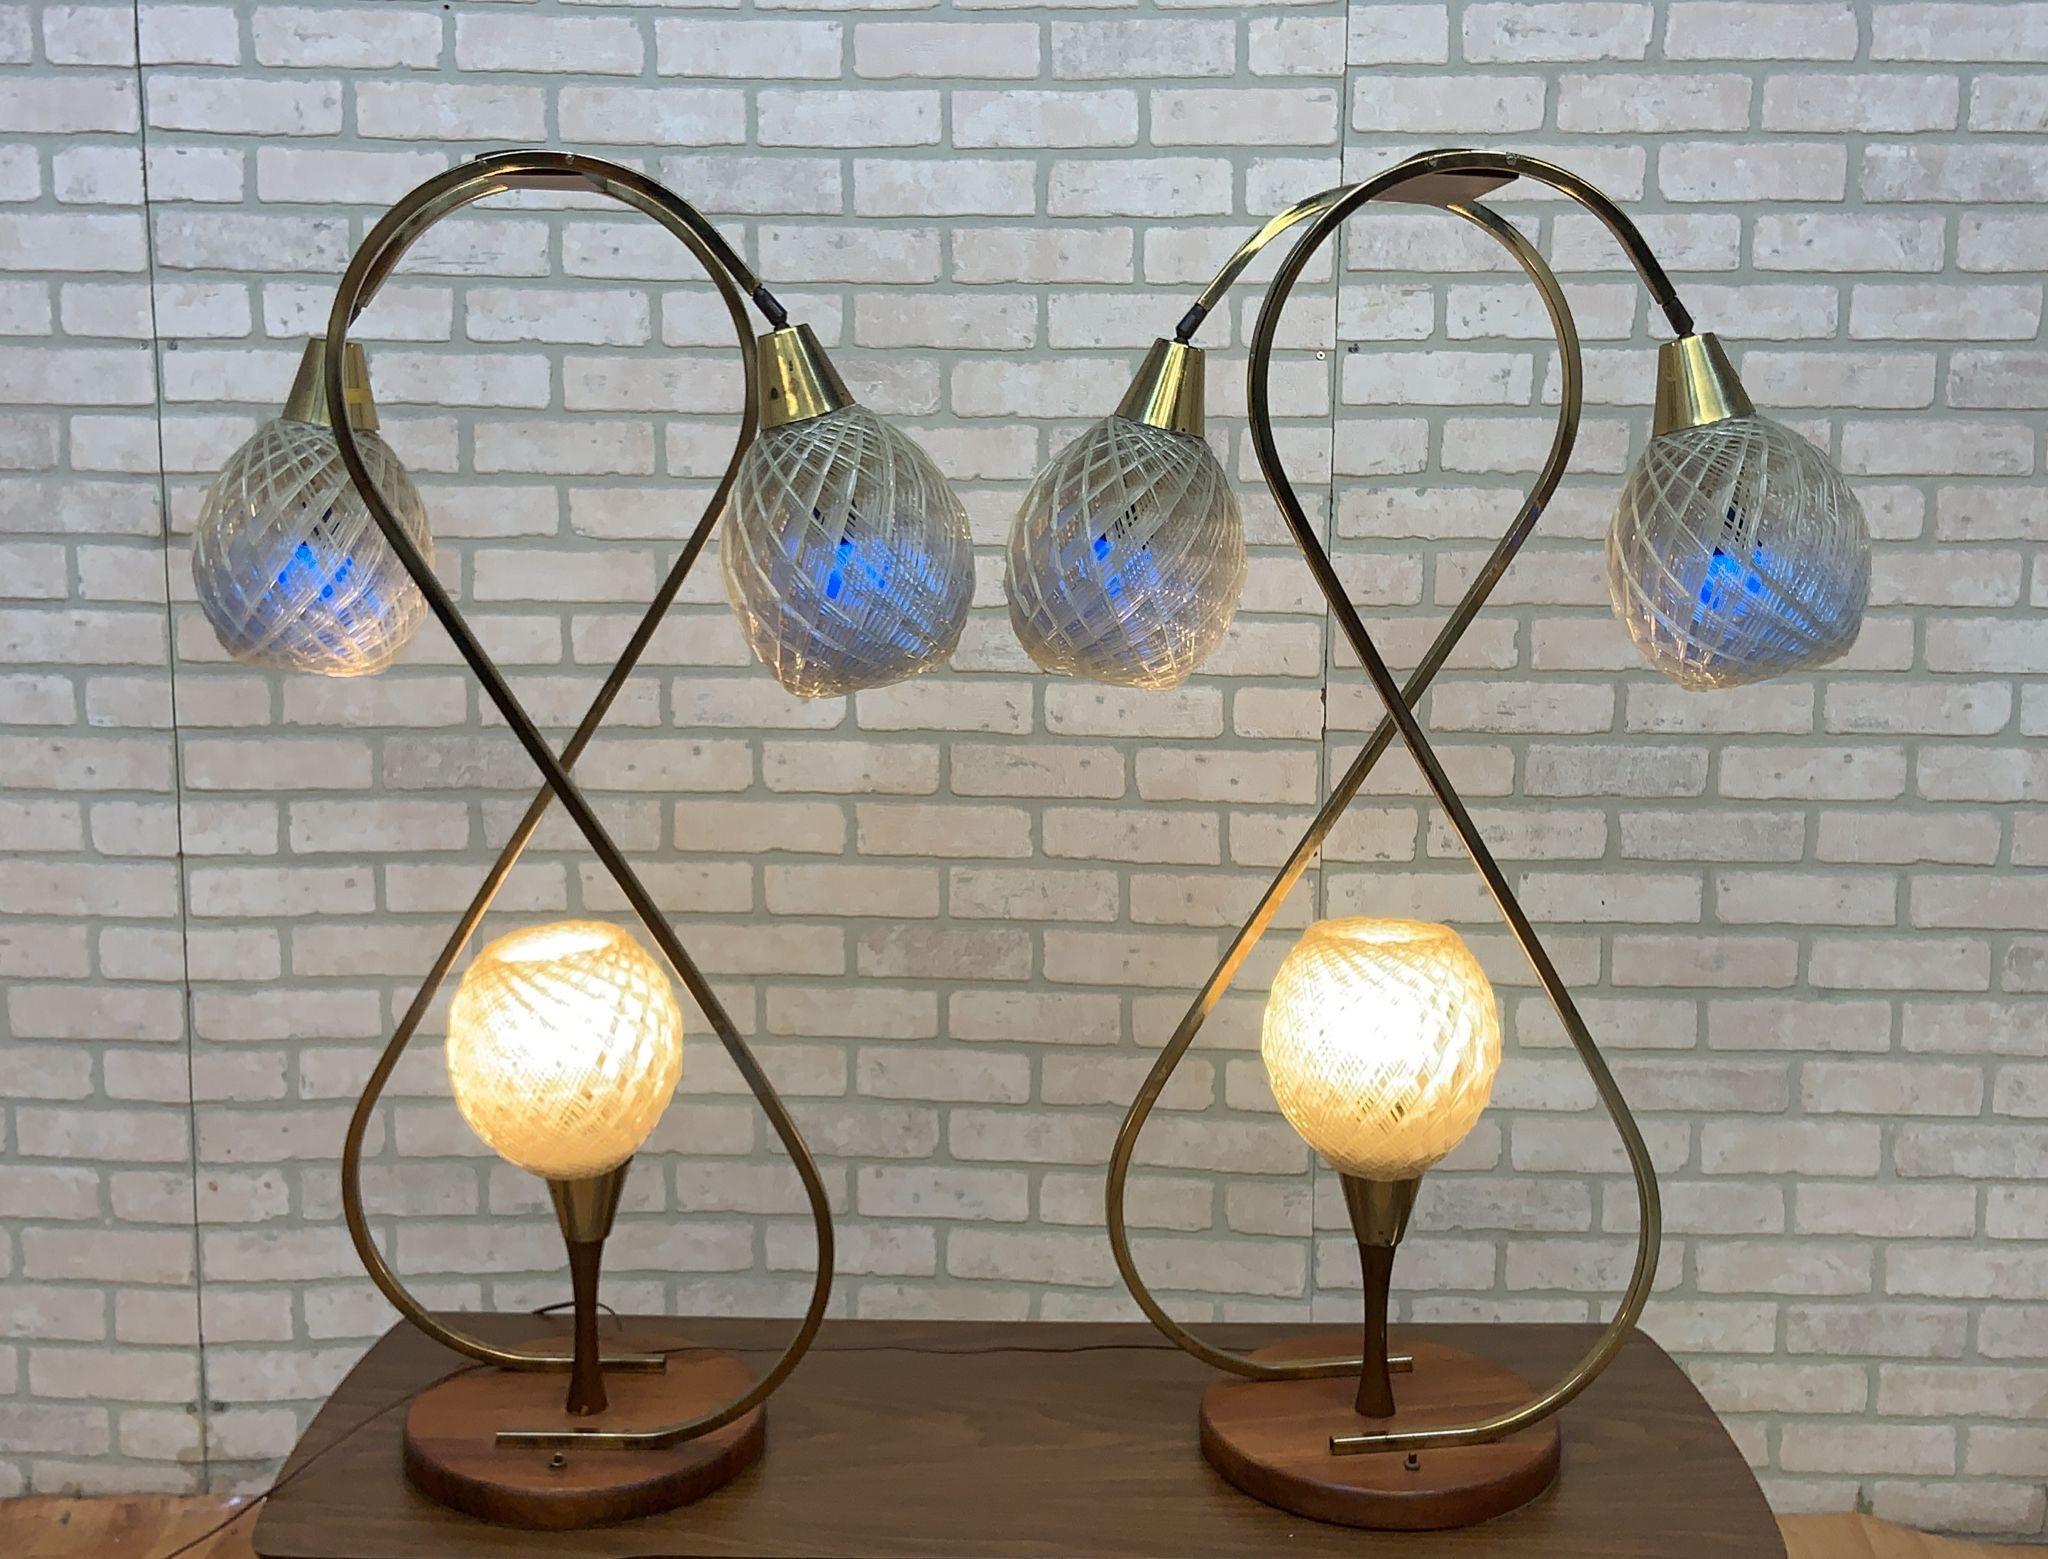 Mid Century Modern Space Age Atomic Lucite Spaghetti Globe Table Lamp - Pair

Super cool pair of mid century modern space age atomic table lamps each with 3 lucite spaghetti shades. Worsk great!!

Circa 1970

Dimensions

W 25”
D 10”
H 42”
